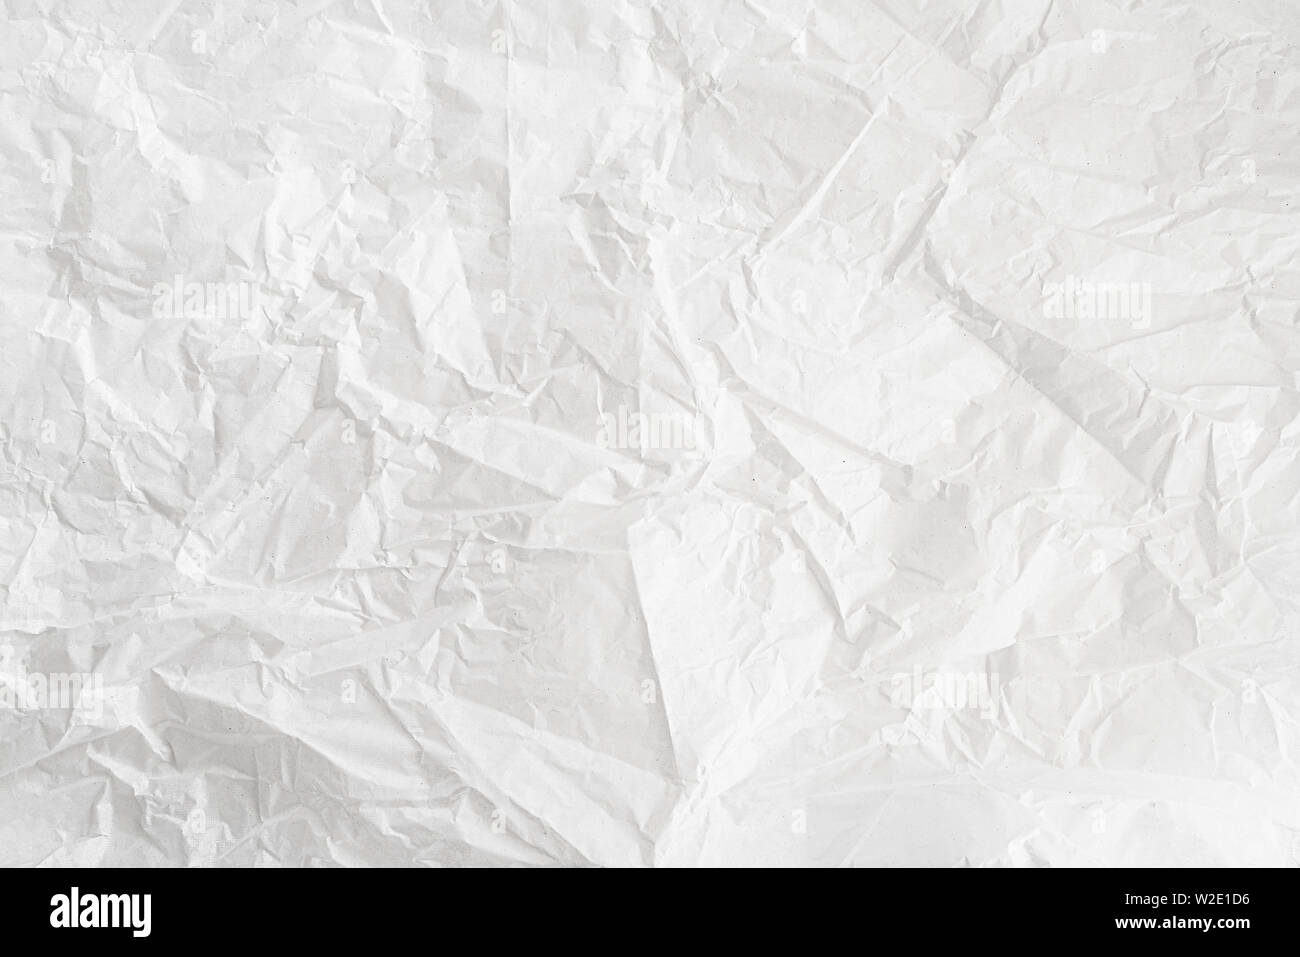 close-up shot of crumpled white wrapping paper background Stock Photo